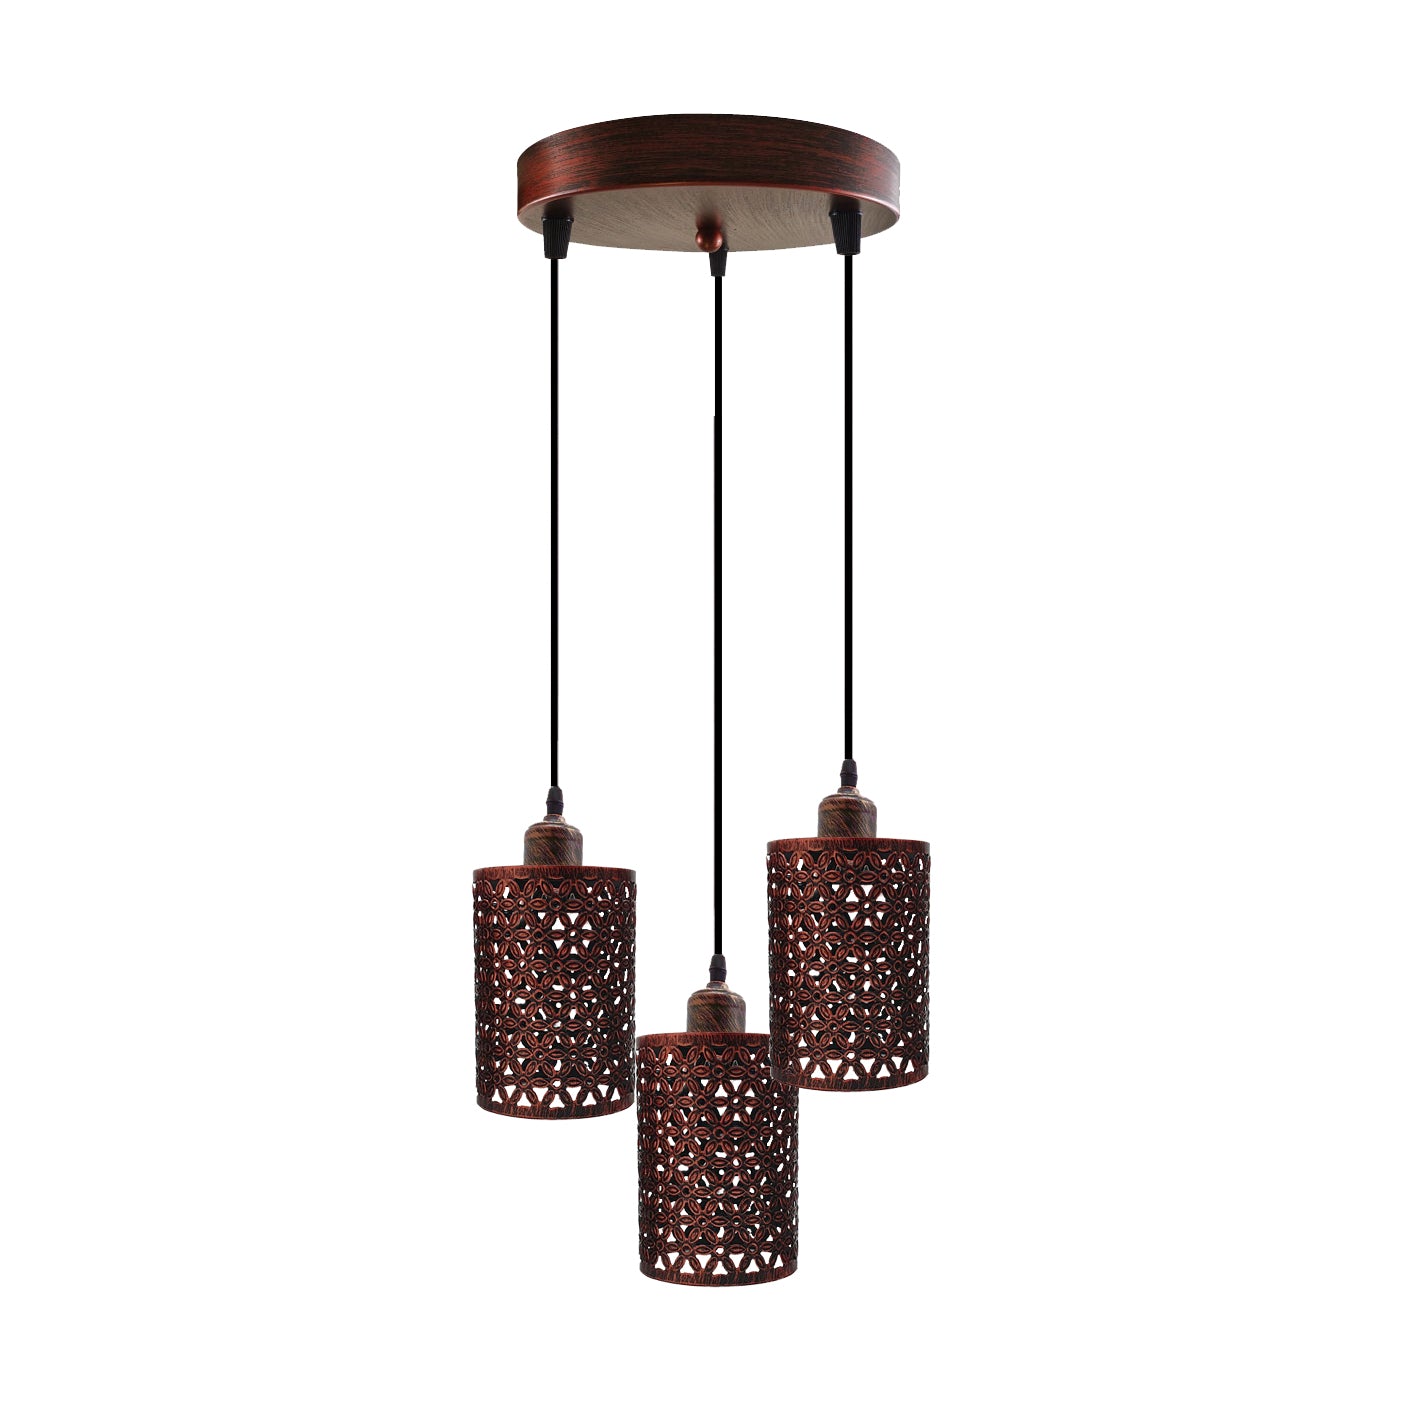 3 way cluster pendant light metal wire cage light